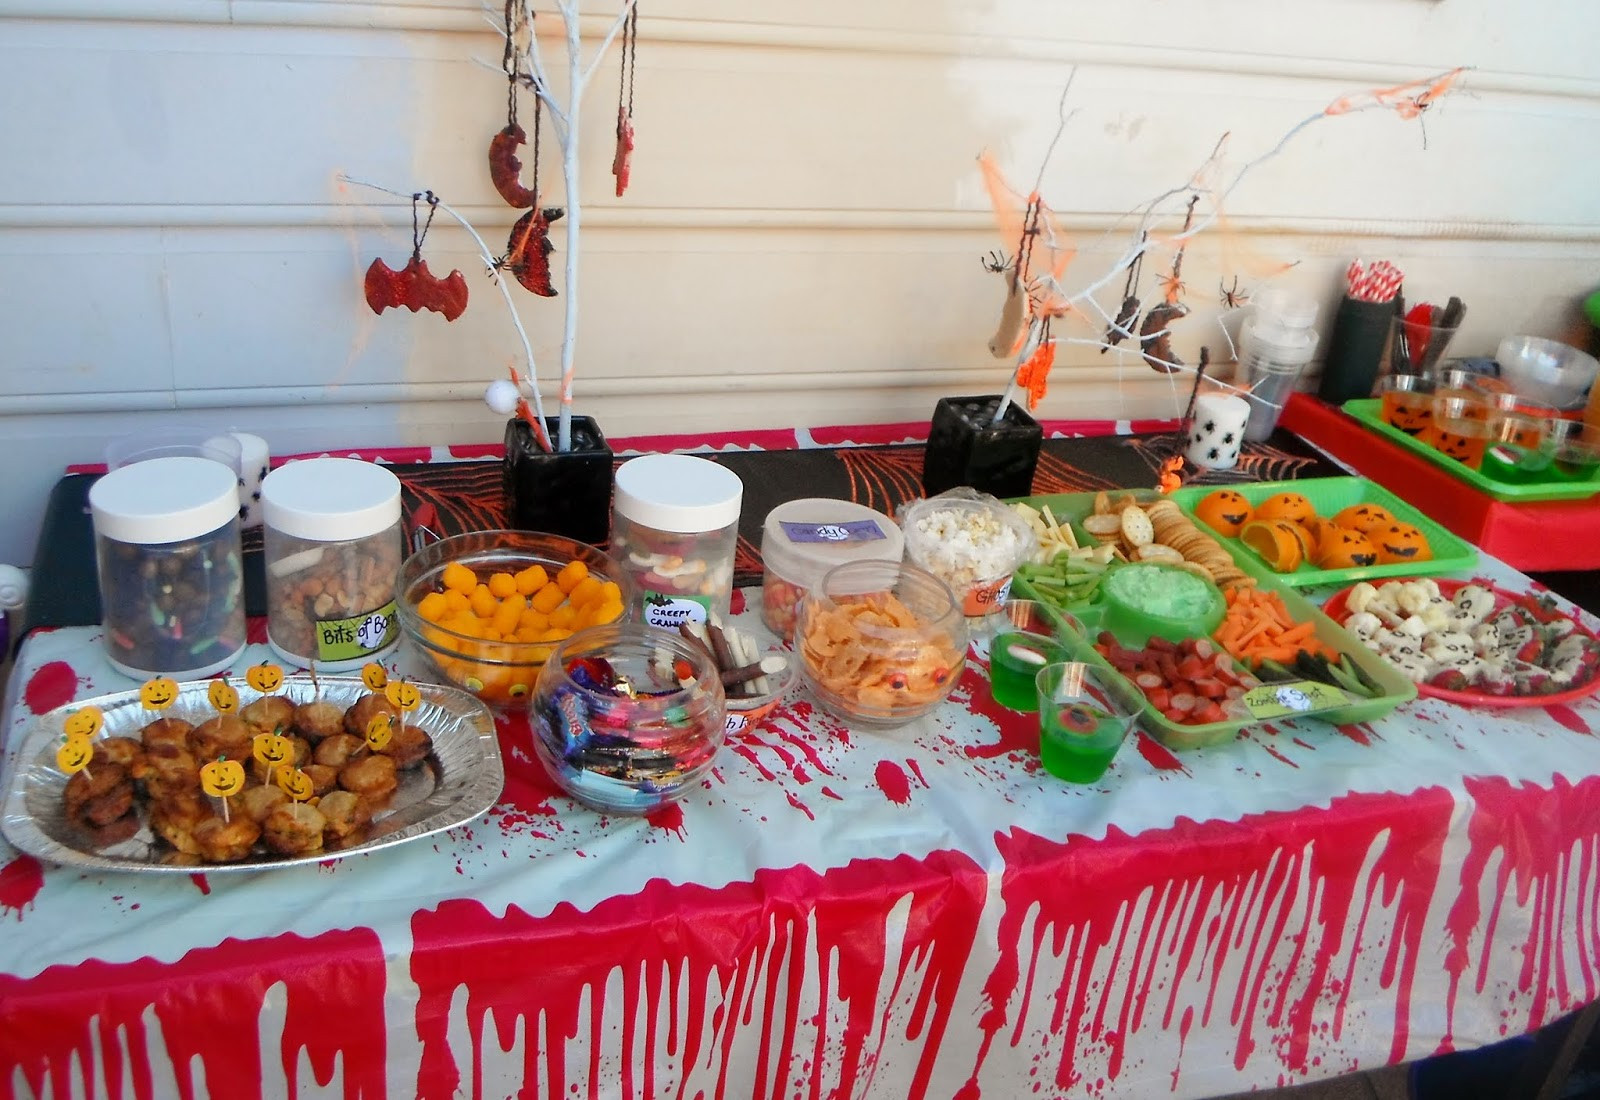 Halloween Party Ideas For Adults And Kids
 Adventures at home with Mum Halloween Party Food